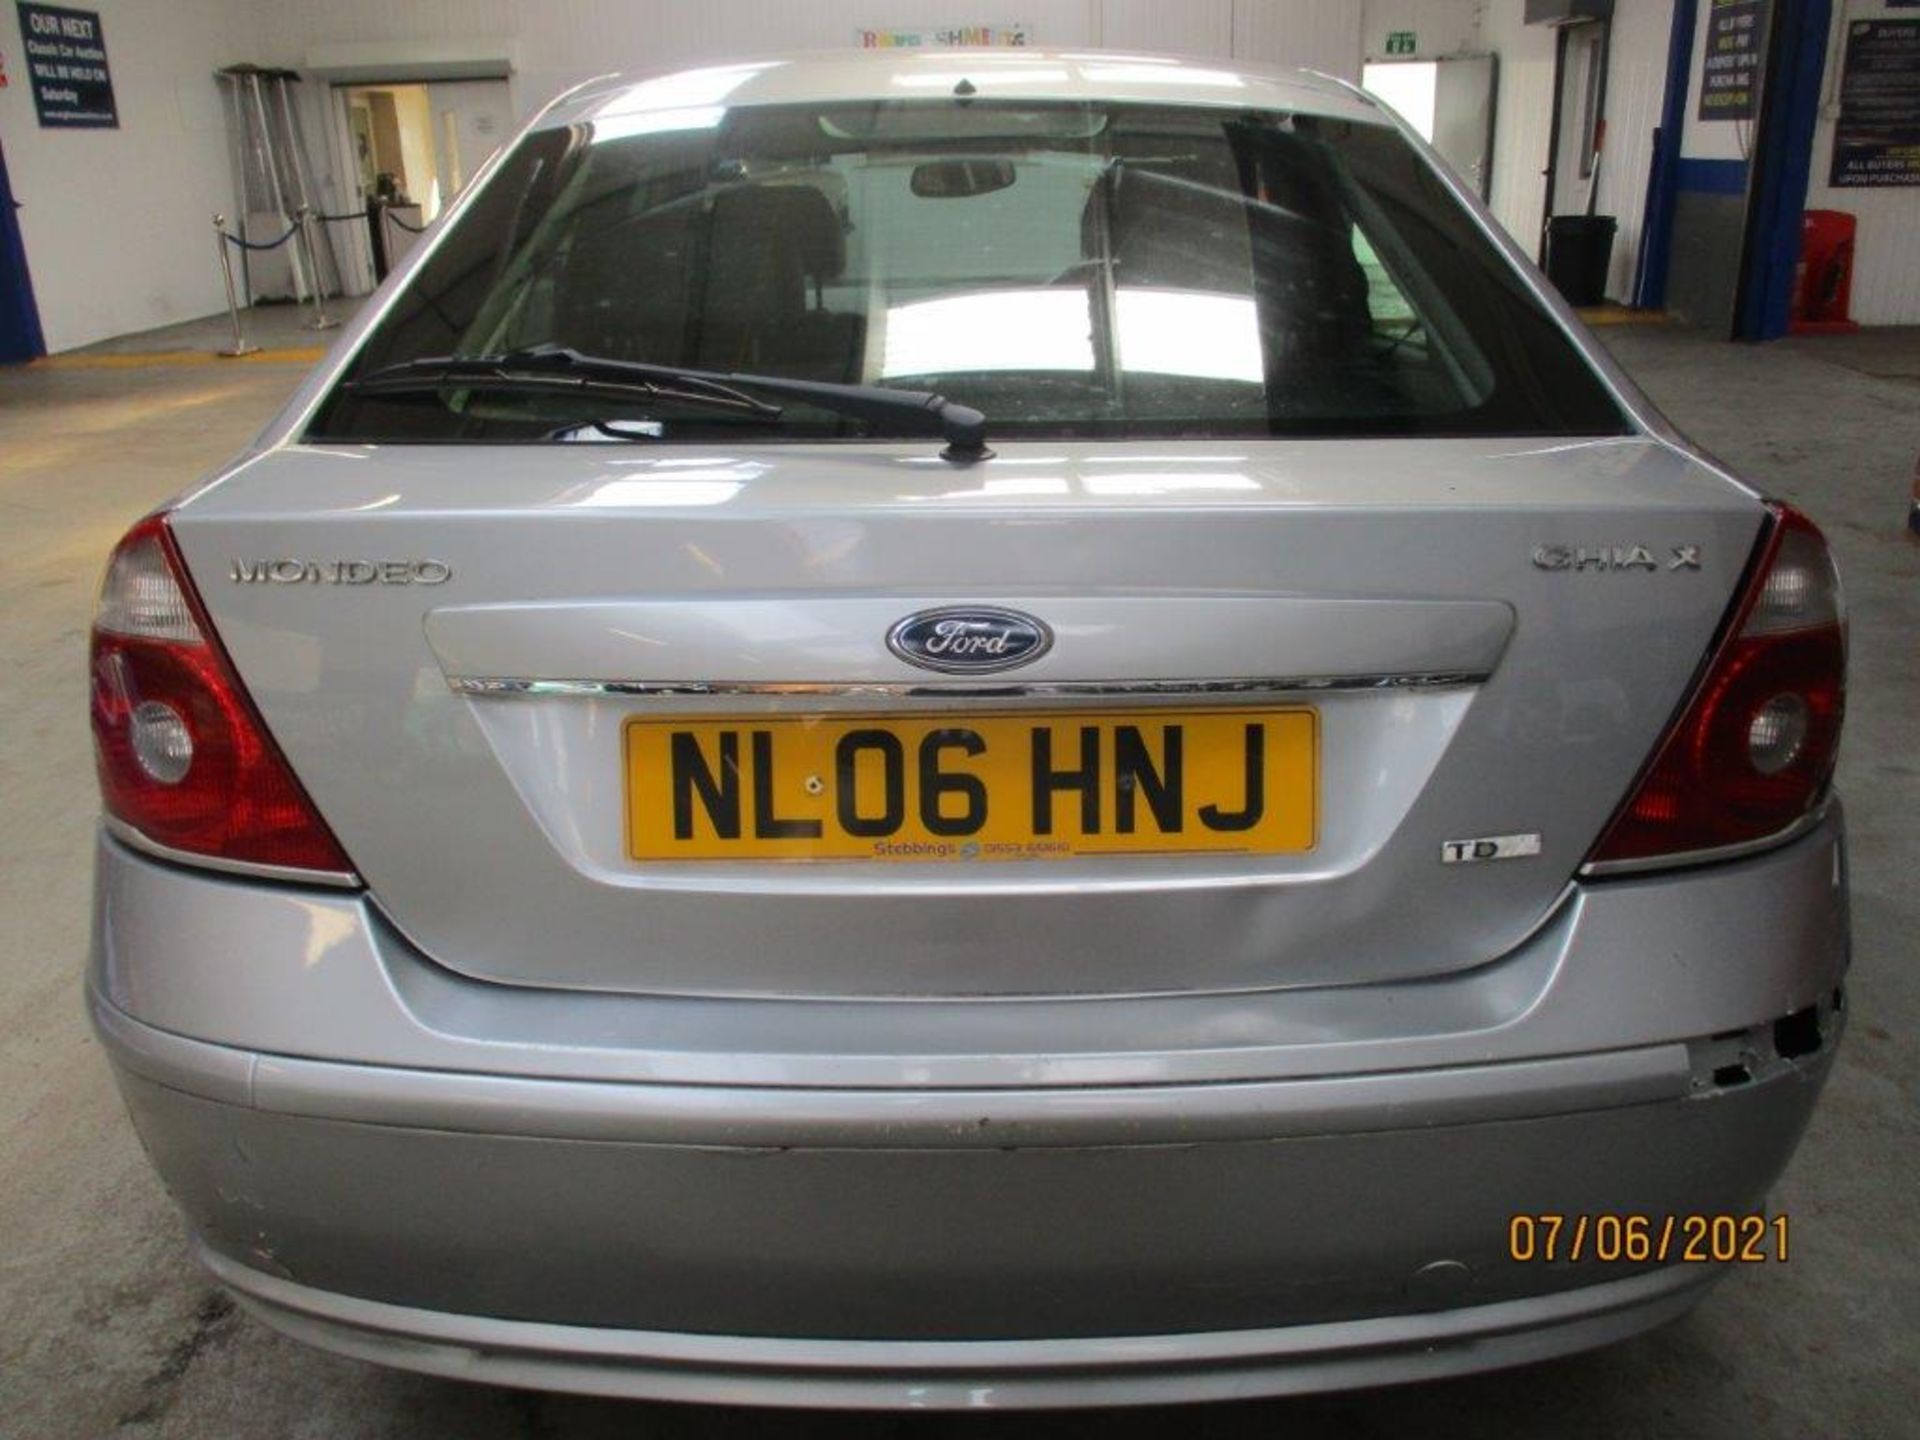 06 06 Ford Mondeo Ghia X TDCI 130 - Image 4 of 18